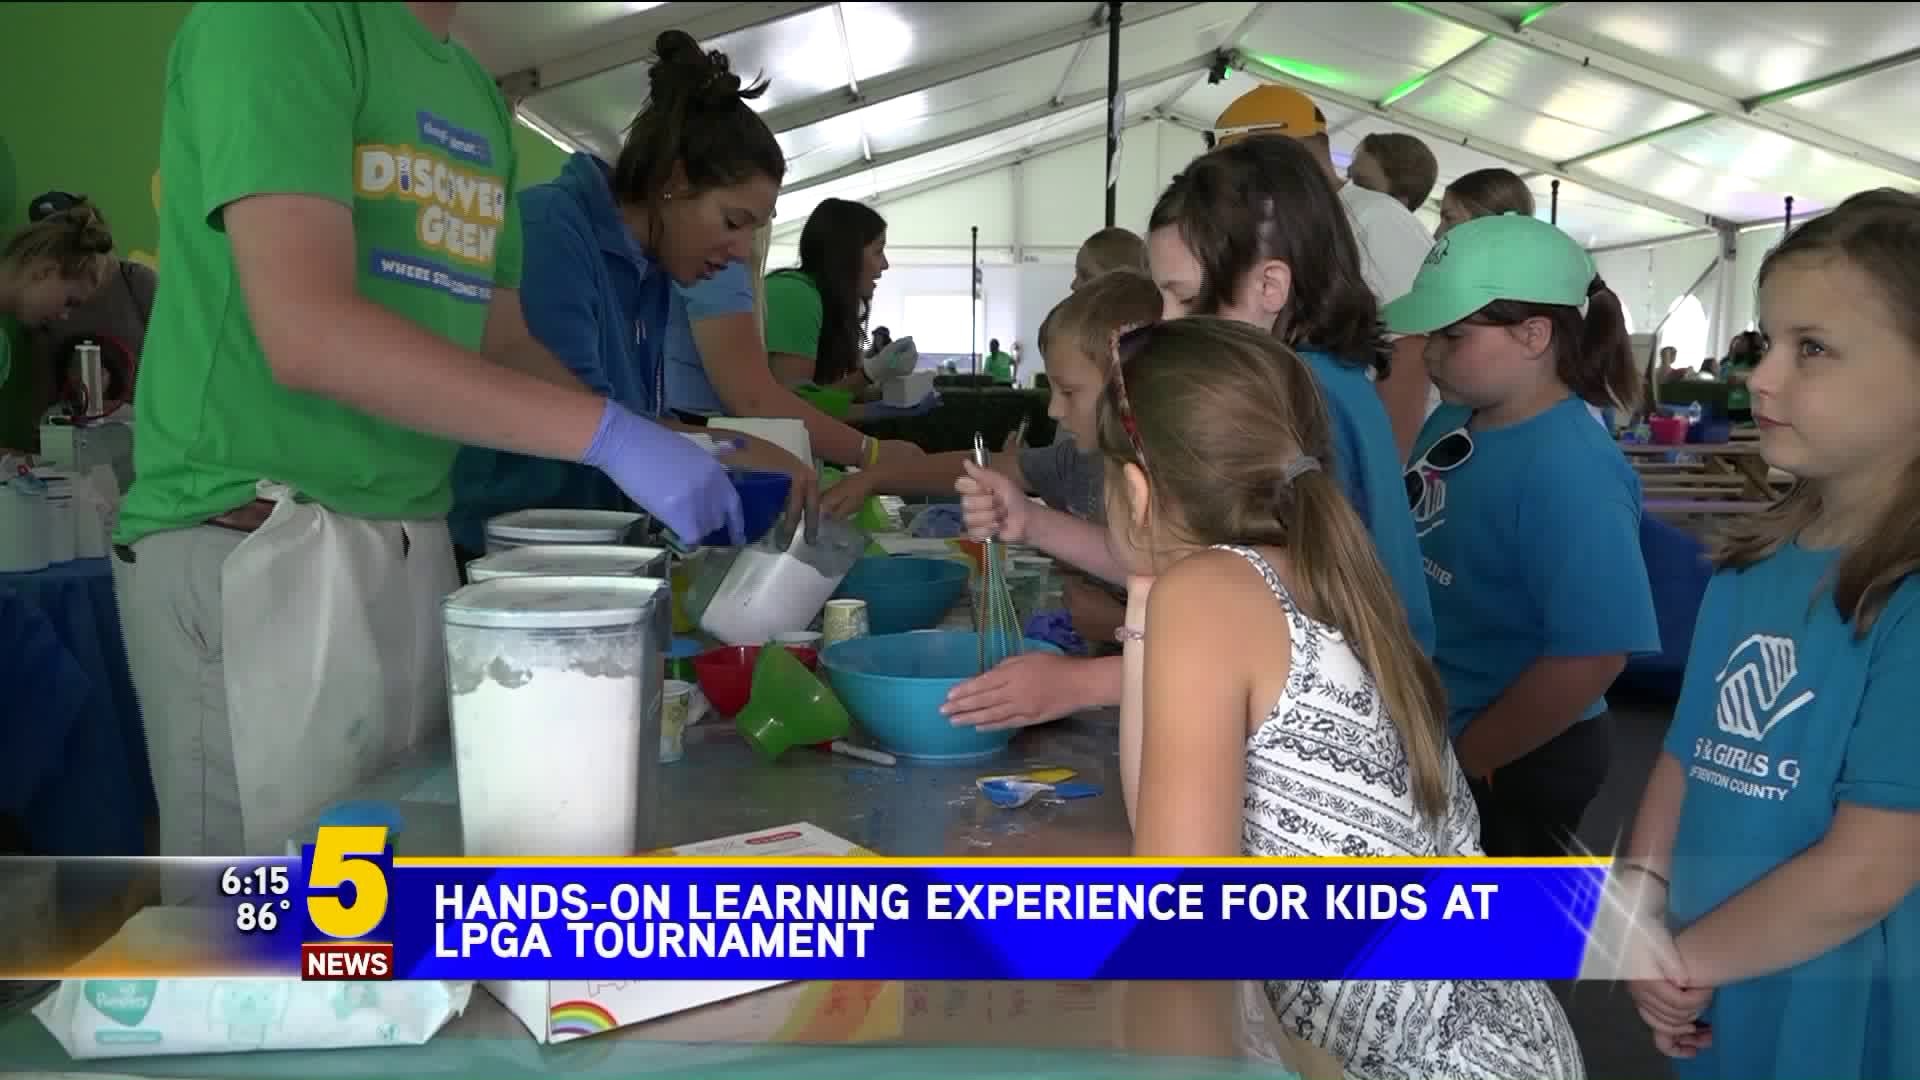 Hands On Learning Experience for Kids at LPGA Tournament